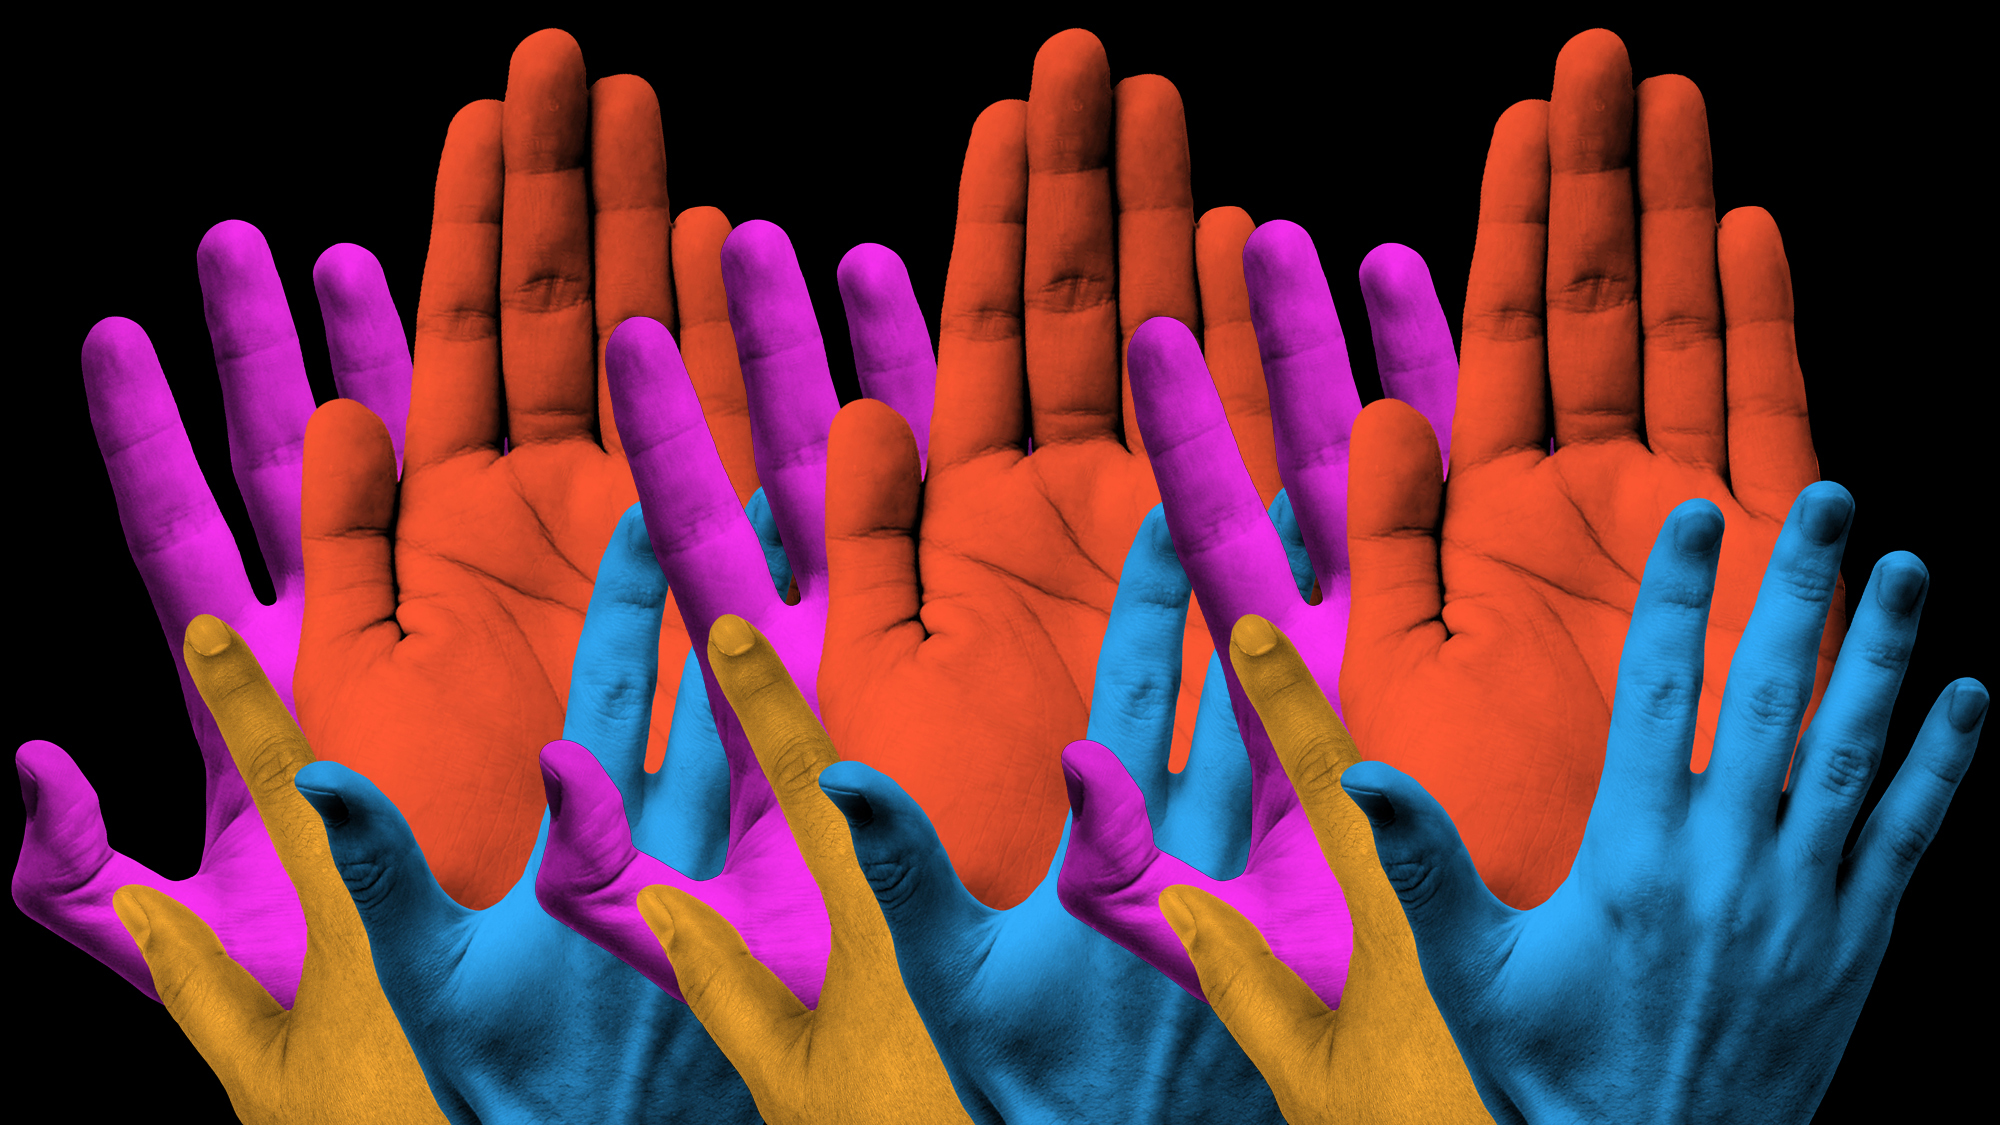 Why we think fake hands are part of our bodies